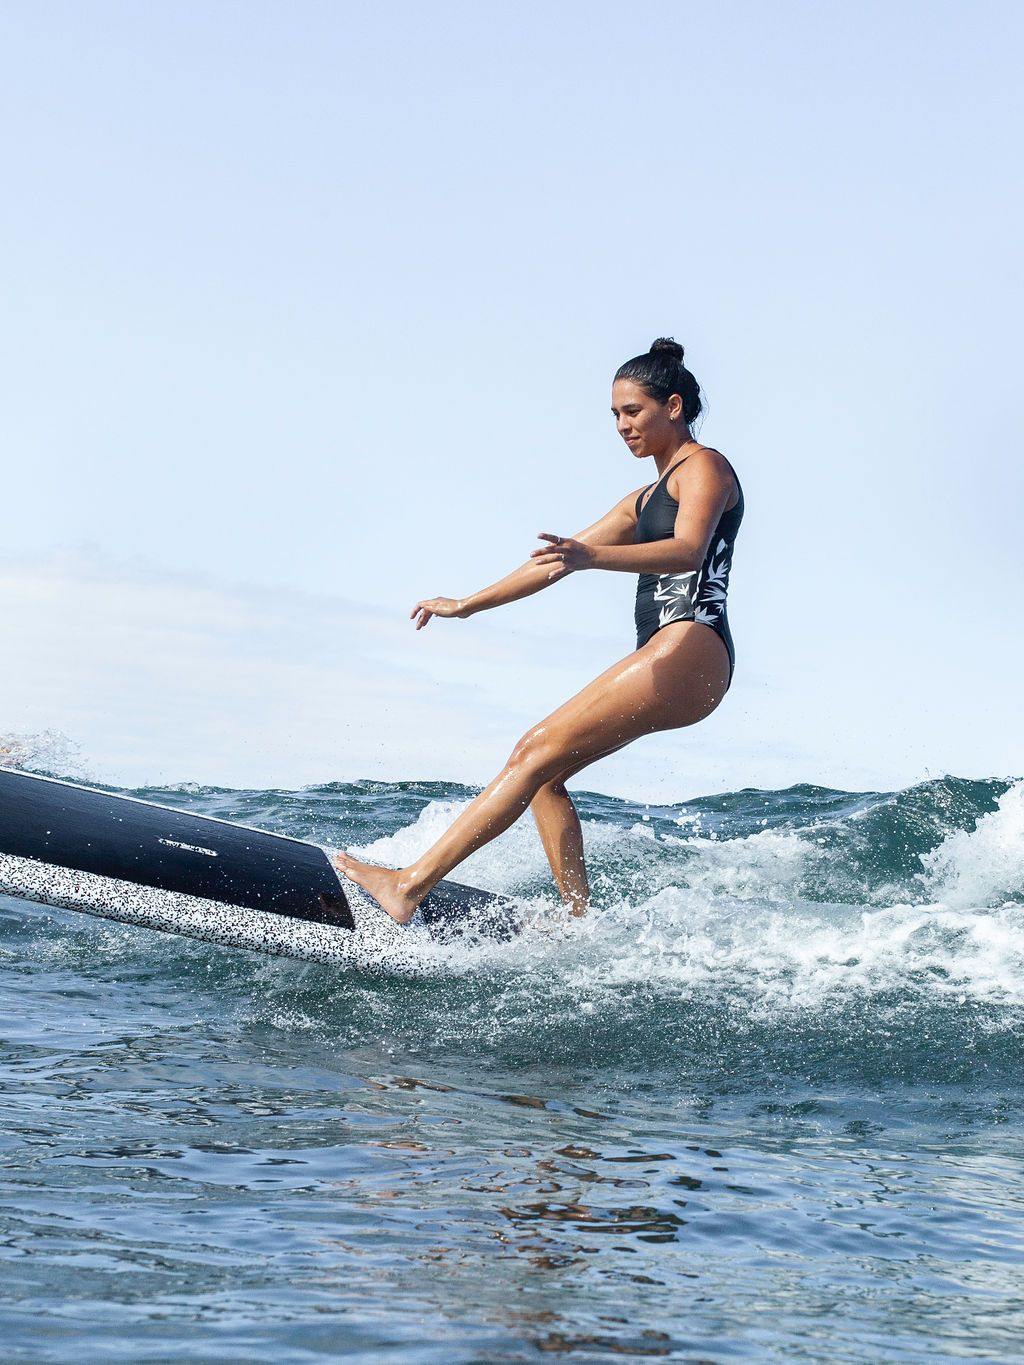 A woman surfing a wave on a speckled 9 foot 6 inch Formula Fun Foamies SanO